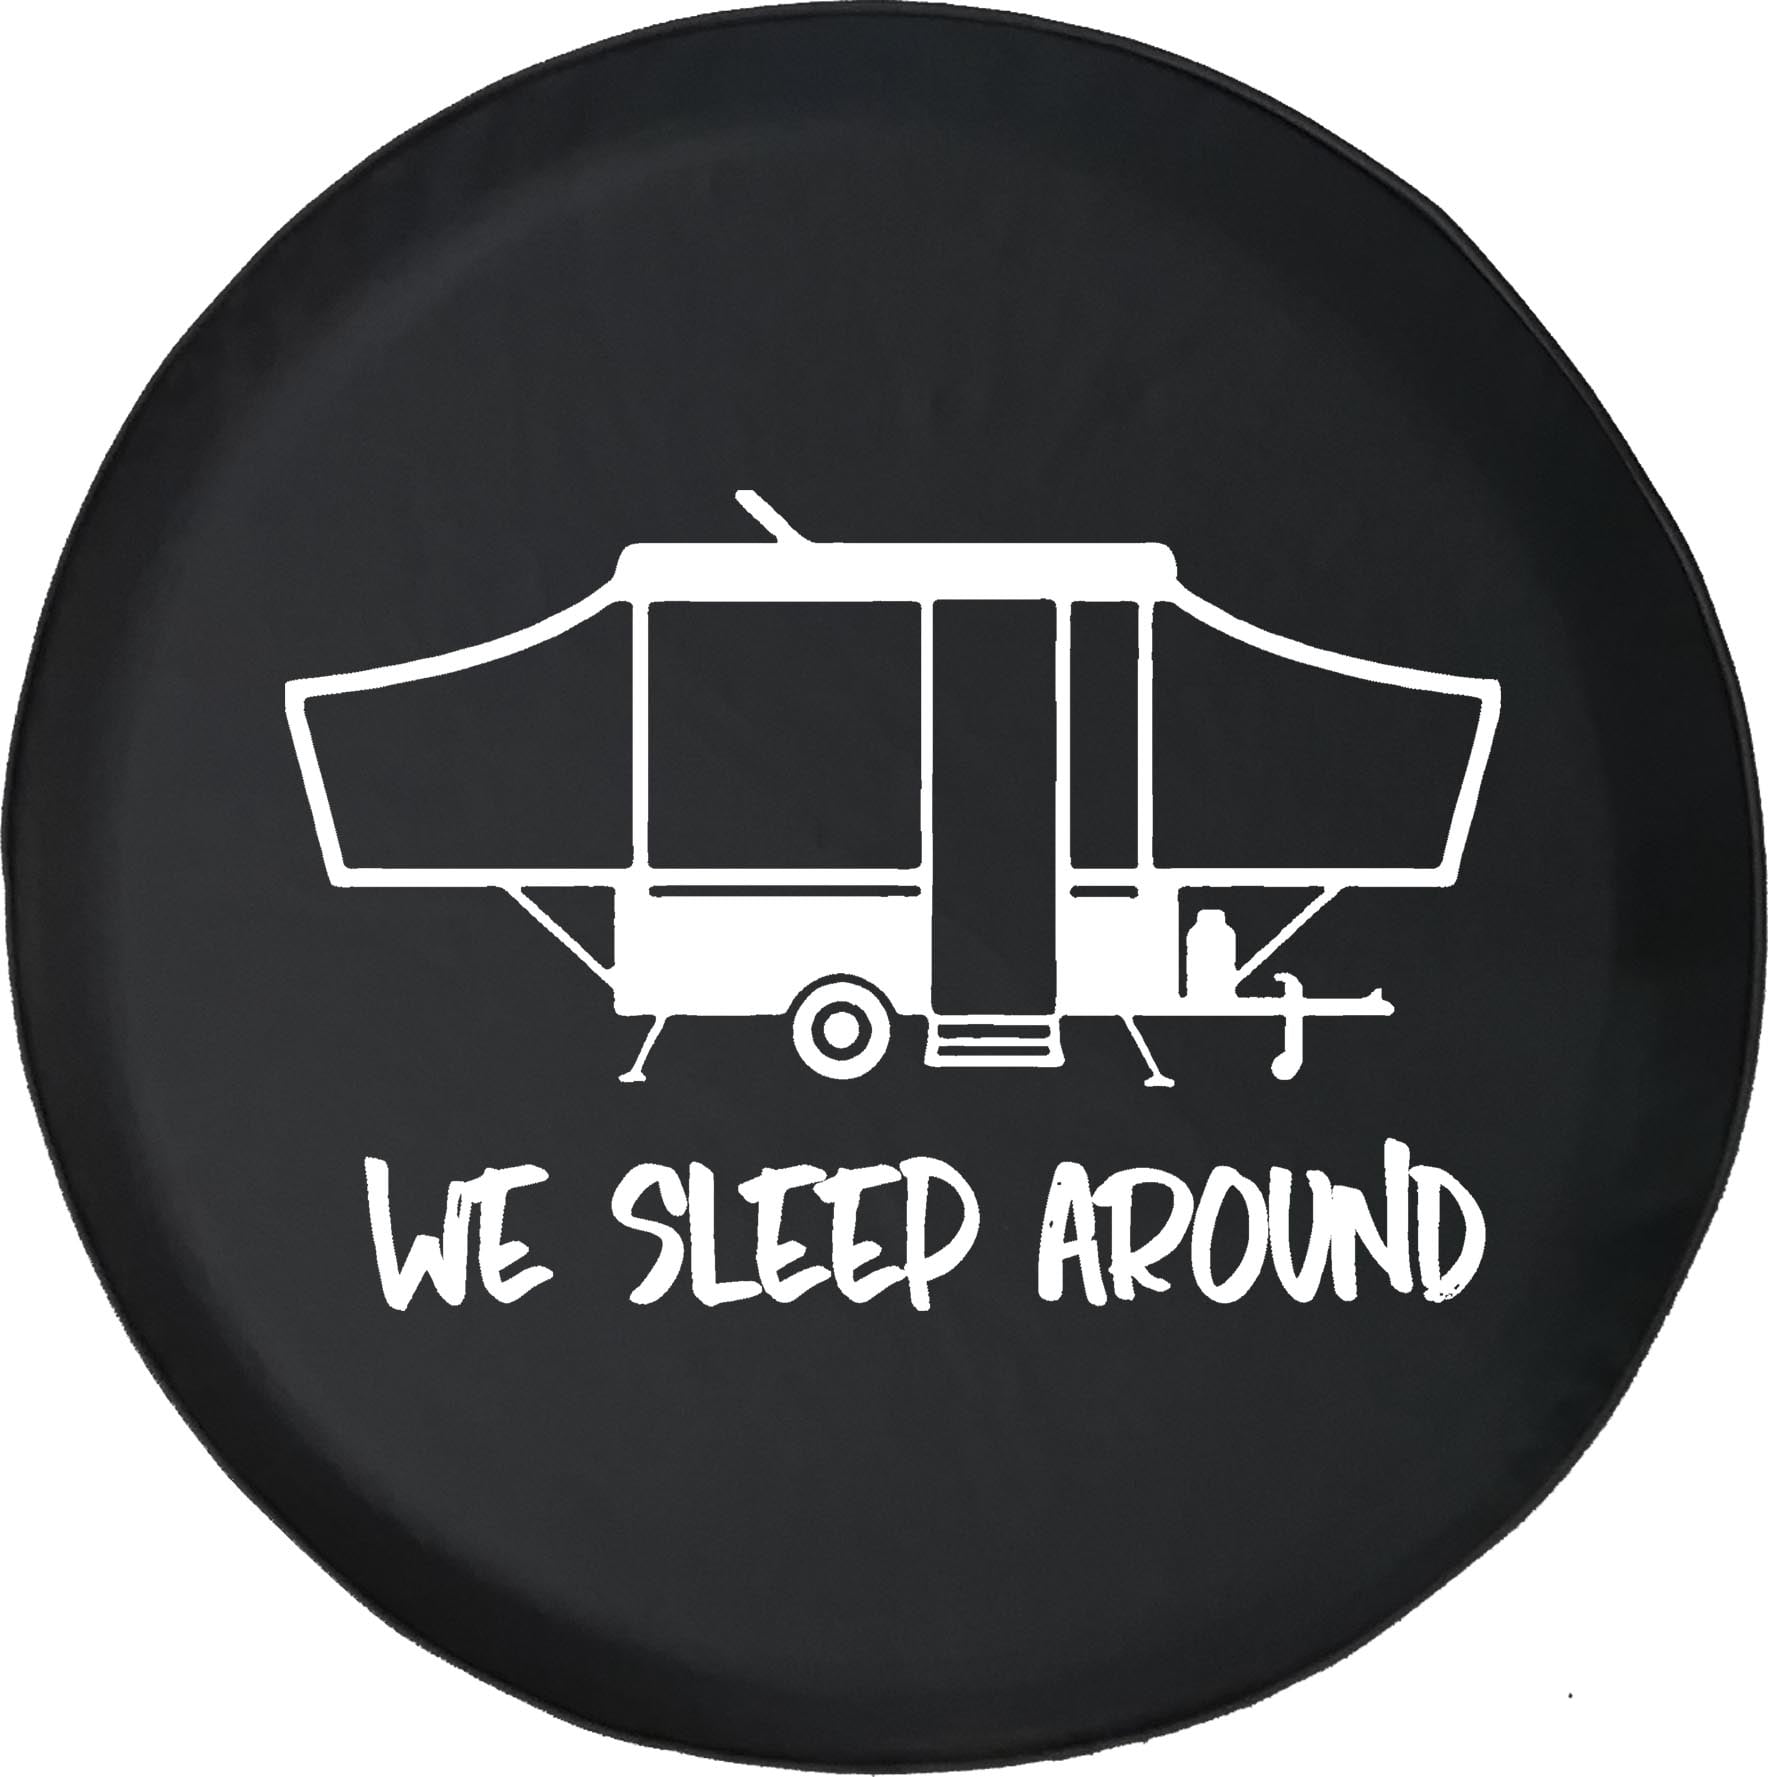 Black Tire Covers Tire Accessories for Campers, SUVs, Trailers, Trucks,  RVs and More We Sleep Around Pop up Trailer Black 33 Inch